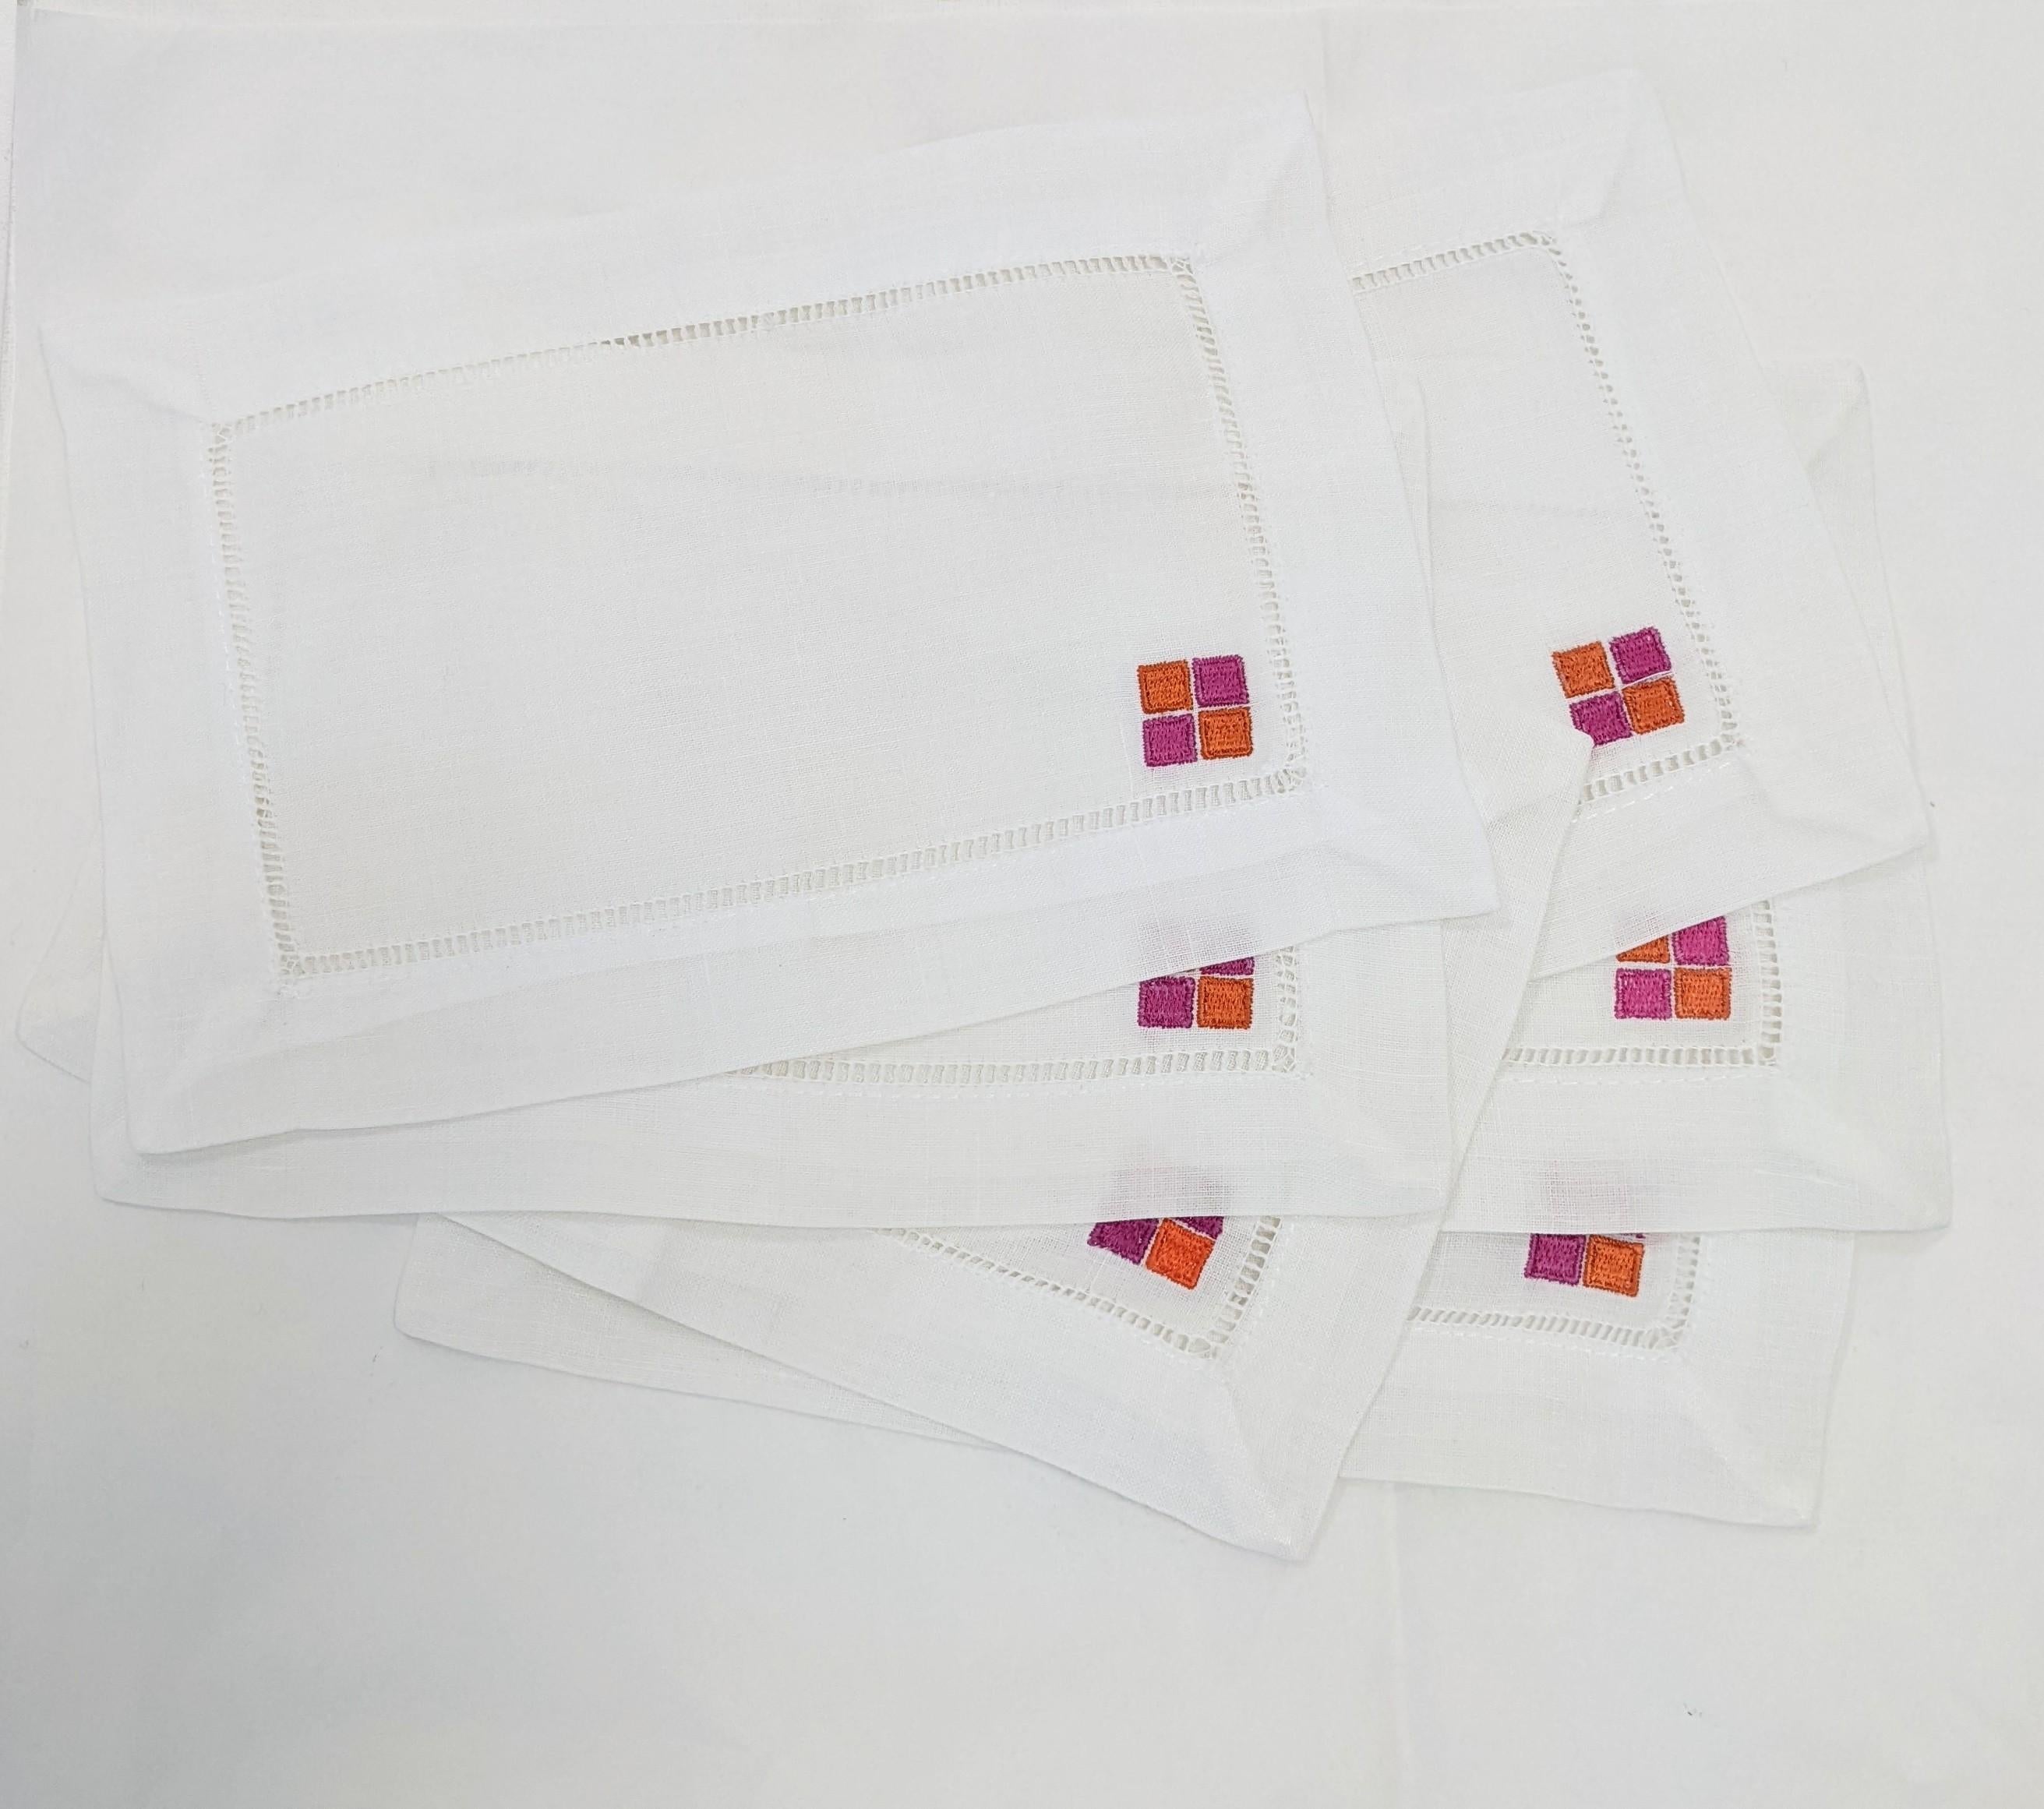 Yves Saint Laurent Rive Gauche Cocktail Napkins In Excellent Condition For Sale In New York, NY